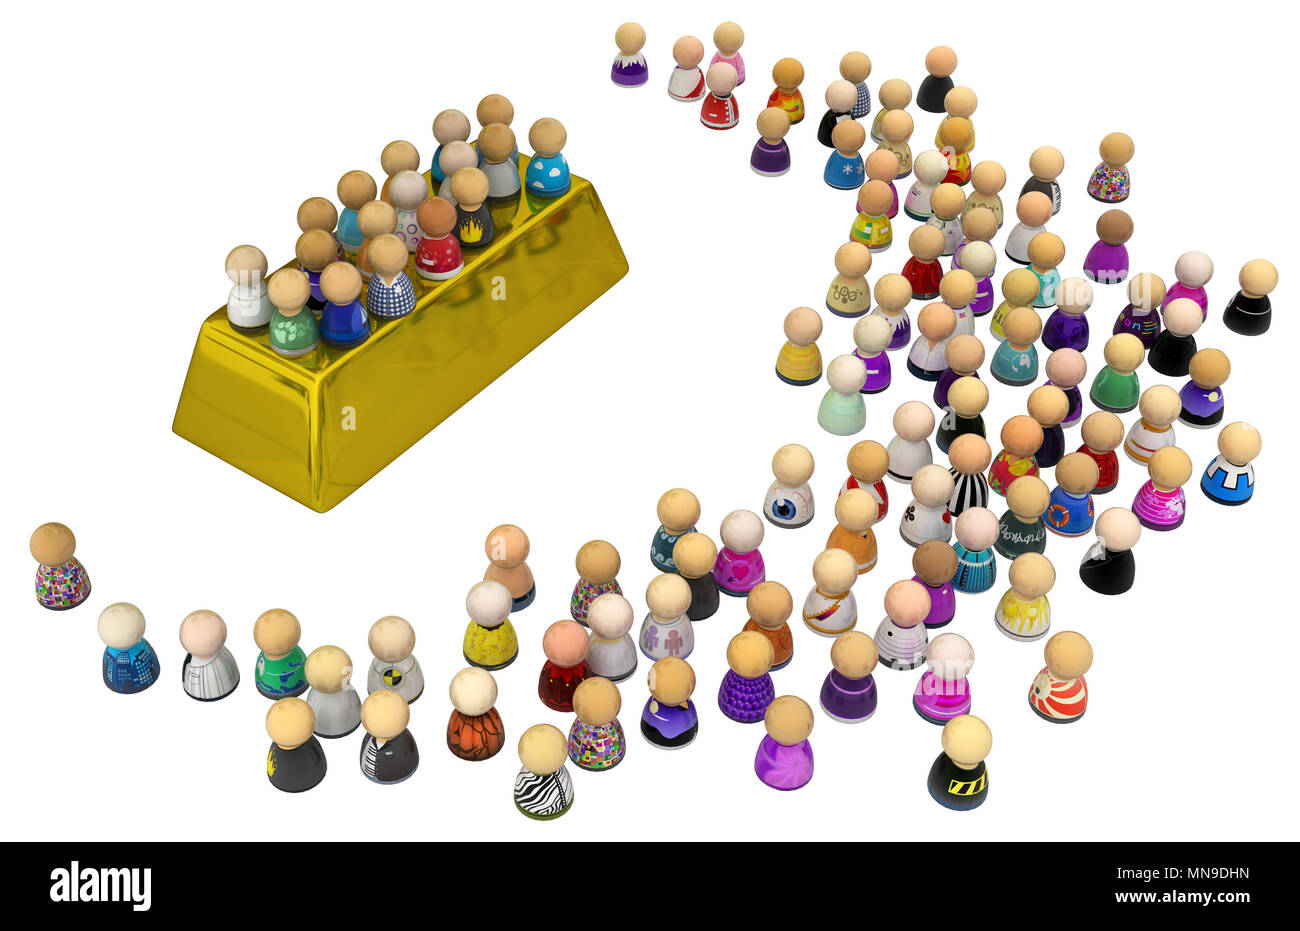 Crowd of small symbolic figures, gold bar, 3d illustration, isolated, horizontal, over white Stock Photo